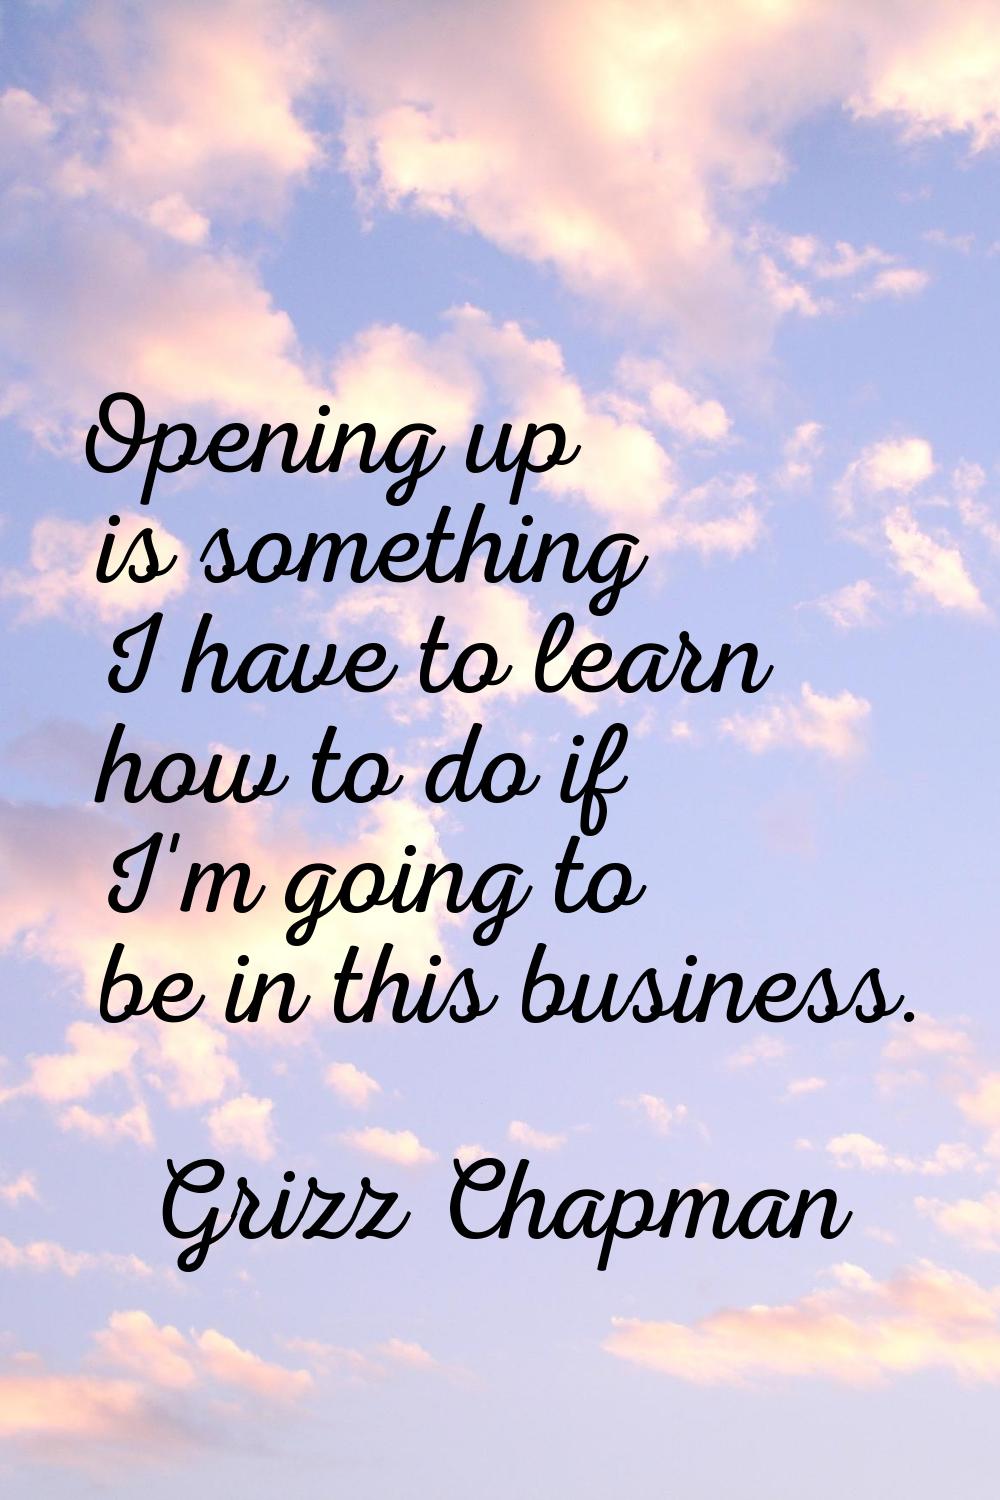 Opening up is something I have to learn how to do if I'm going to be in this business.